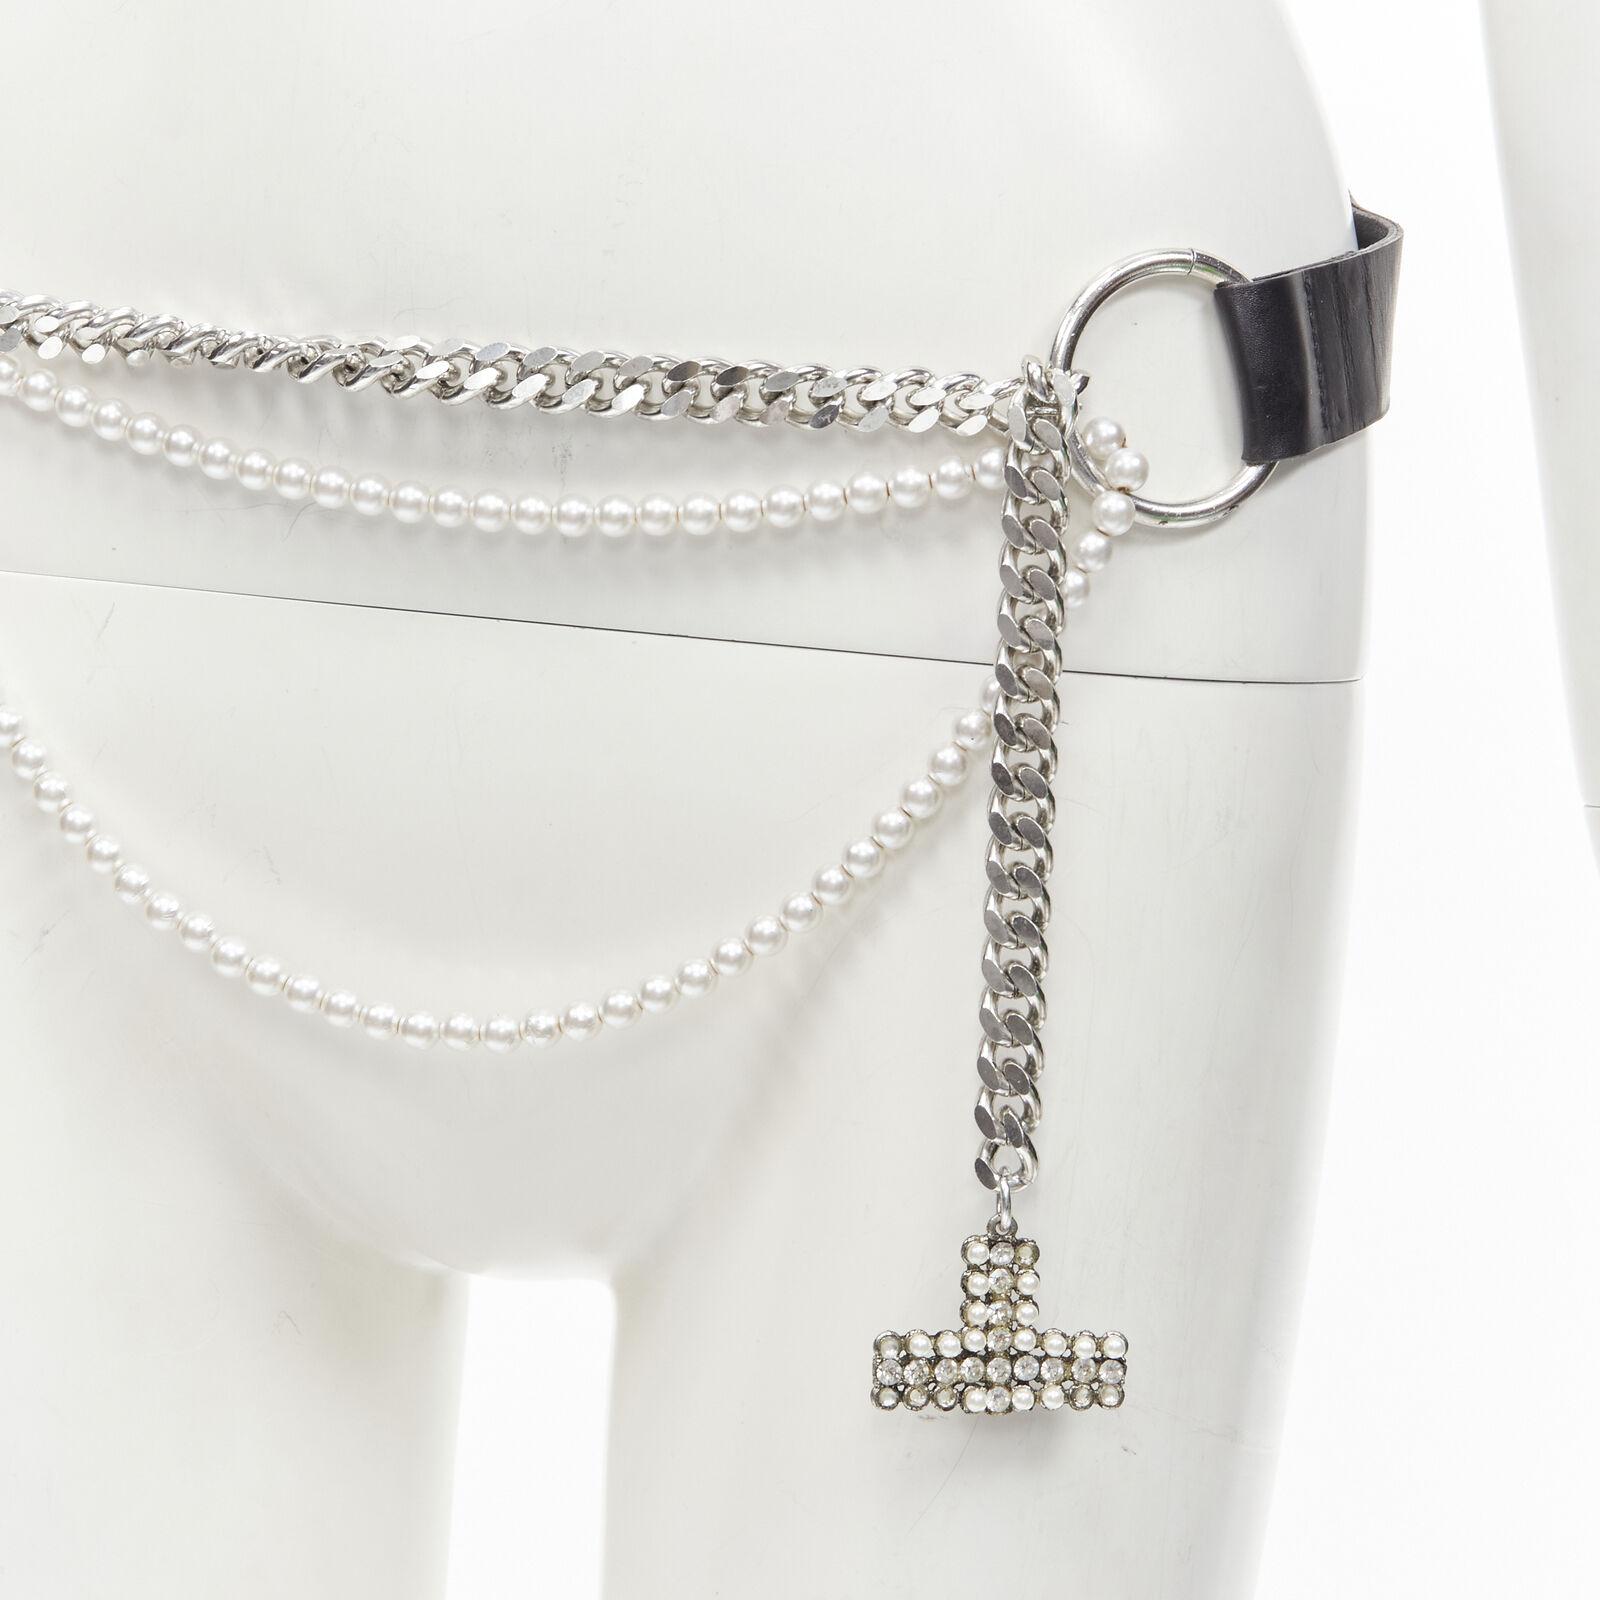 D&G DOLCE GABBANA Vintage Y2K pearl crystal embellishment chain Punk belt
Reference: ANWU/A00861
Brand: D&G
Designer: Domenico Dolce and Stefano Gabbana
Material: Leather
Color: Black
Pattern: Solid
Closure: Belt

CONDITION:
Condition: Fair, this